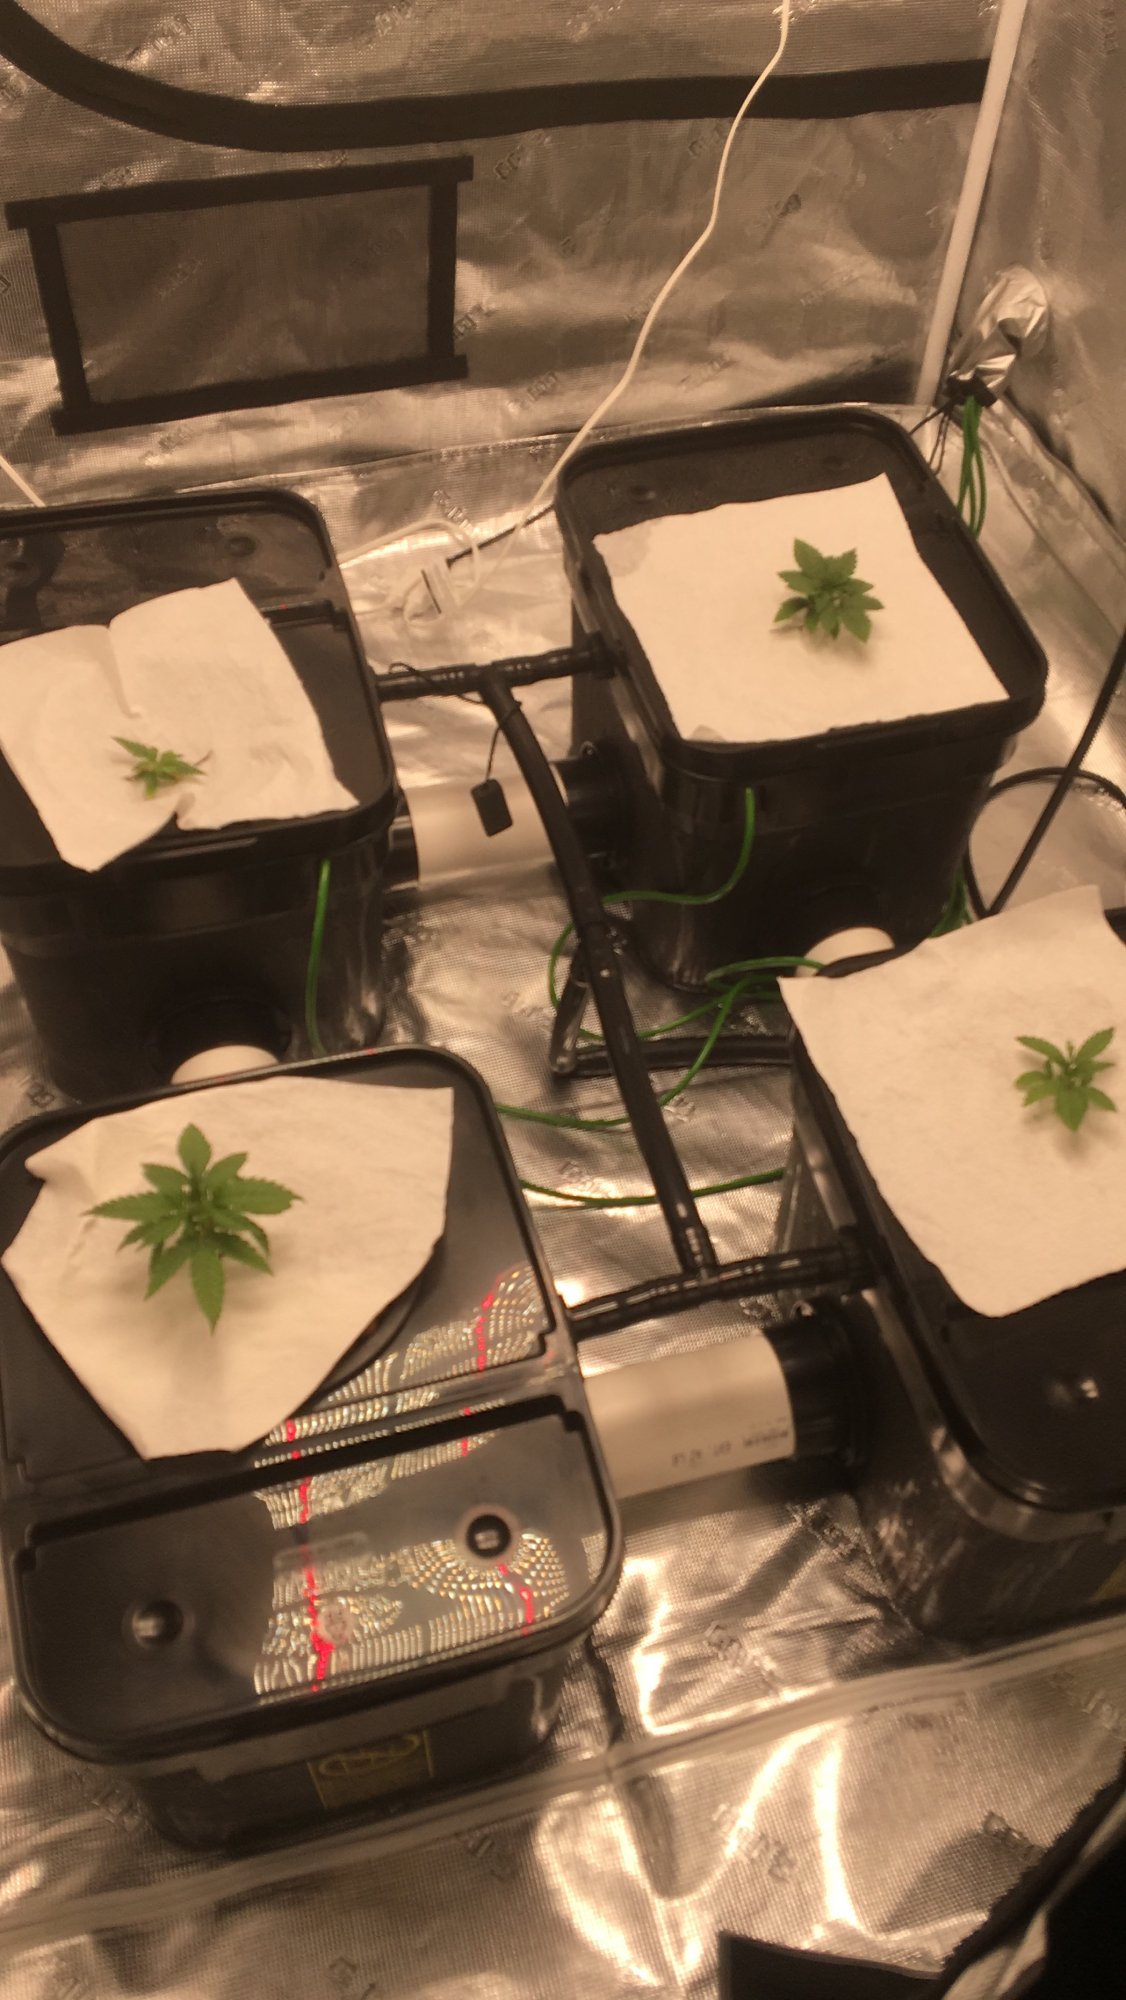 Help my first grow ever in rdwc 2